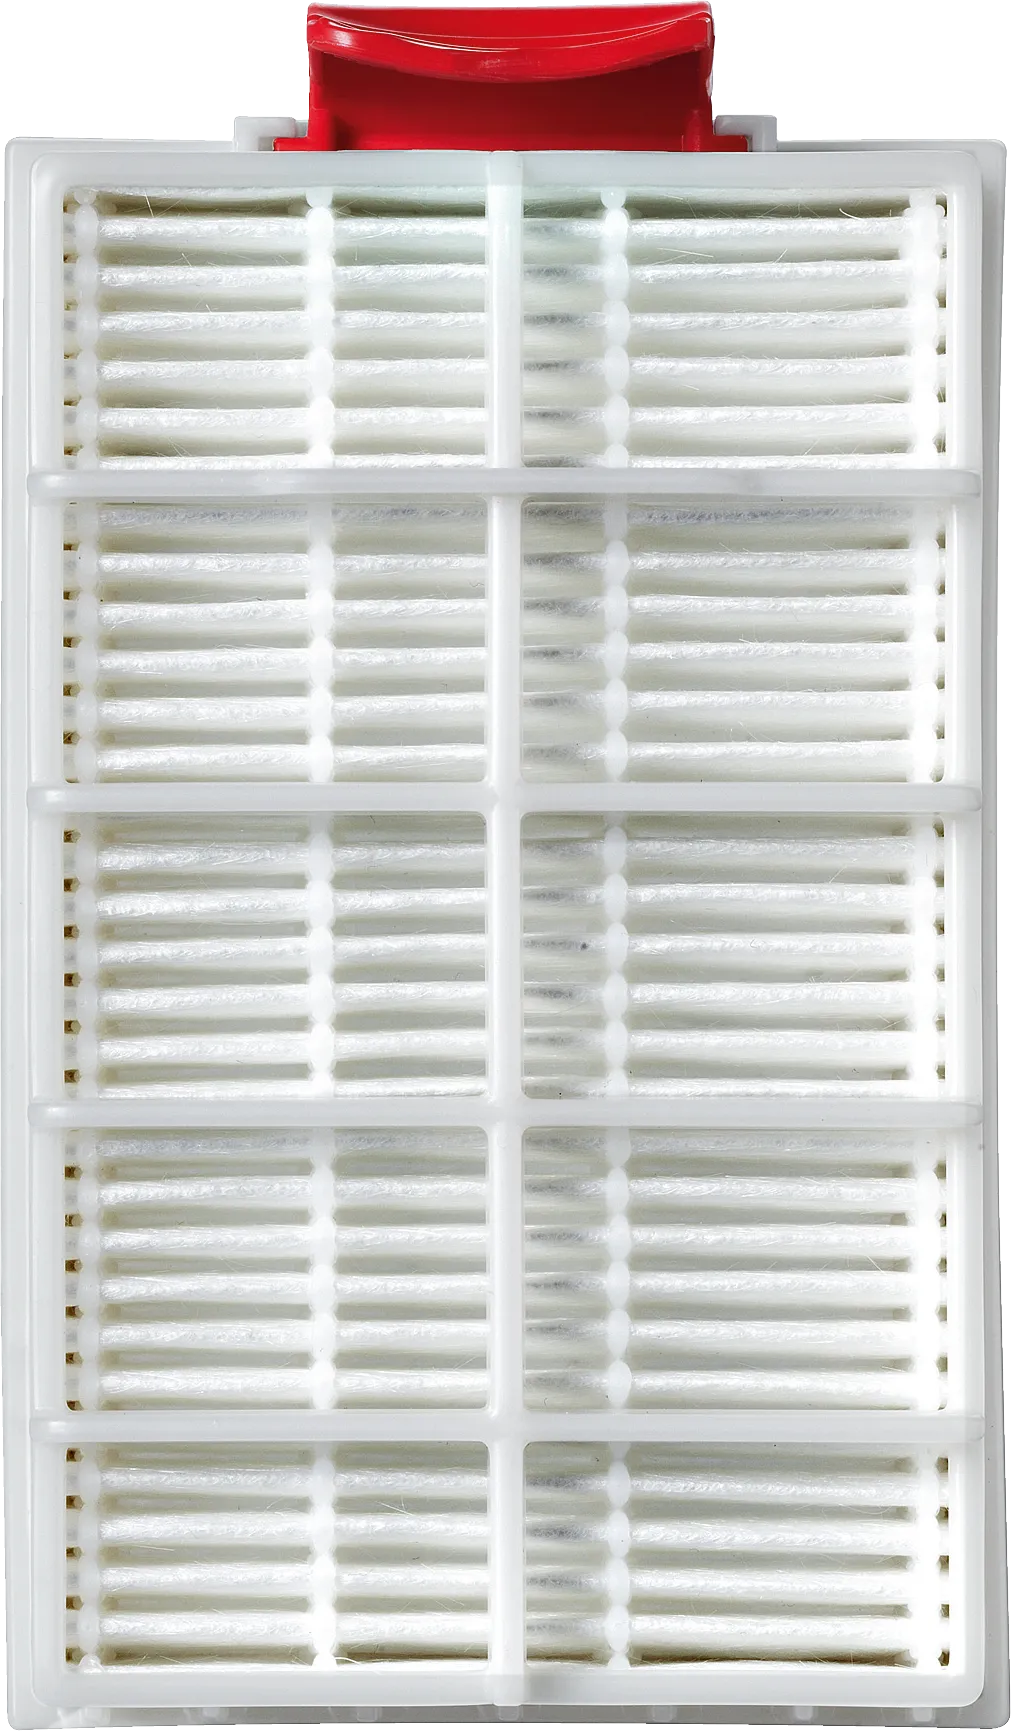 High performance hygiene filter Hepa filter for vacuum cleaners 